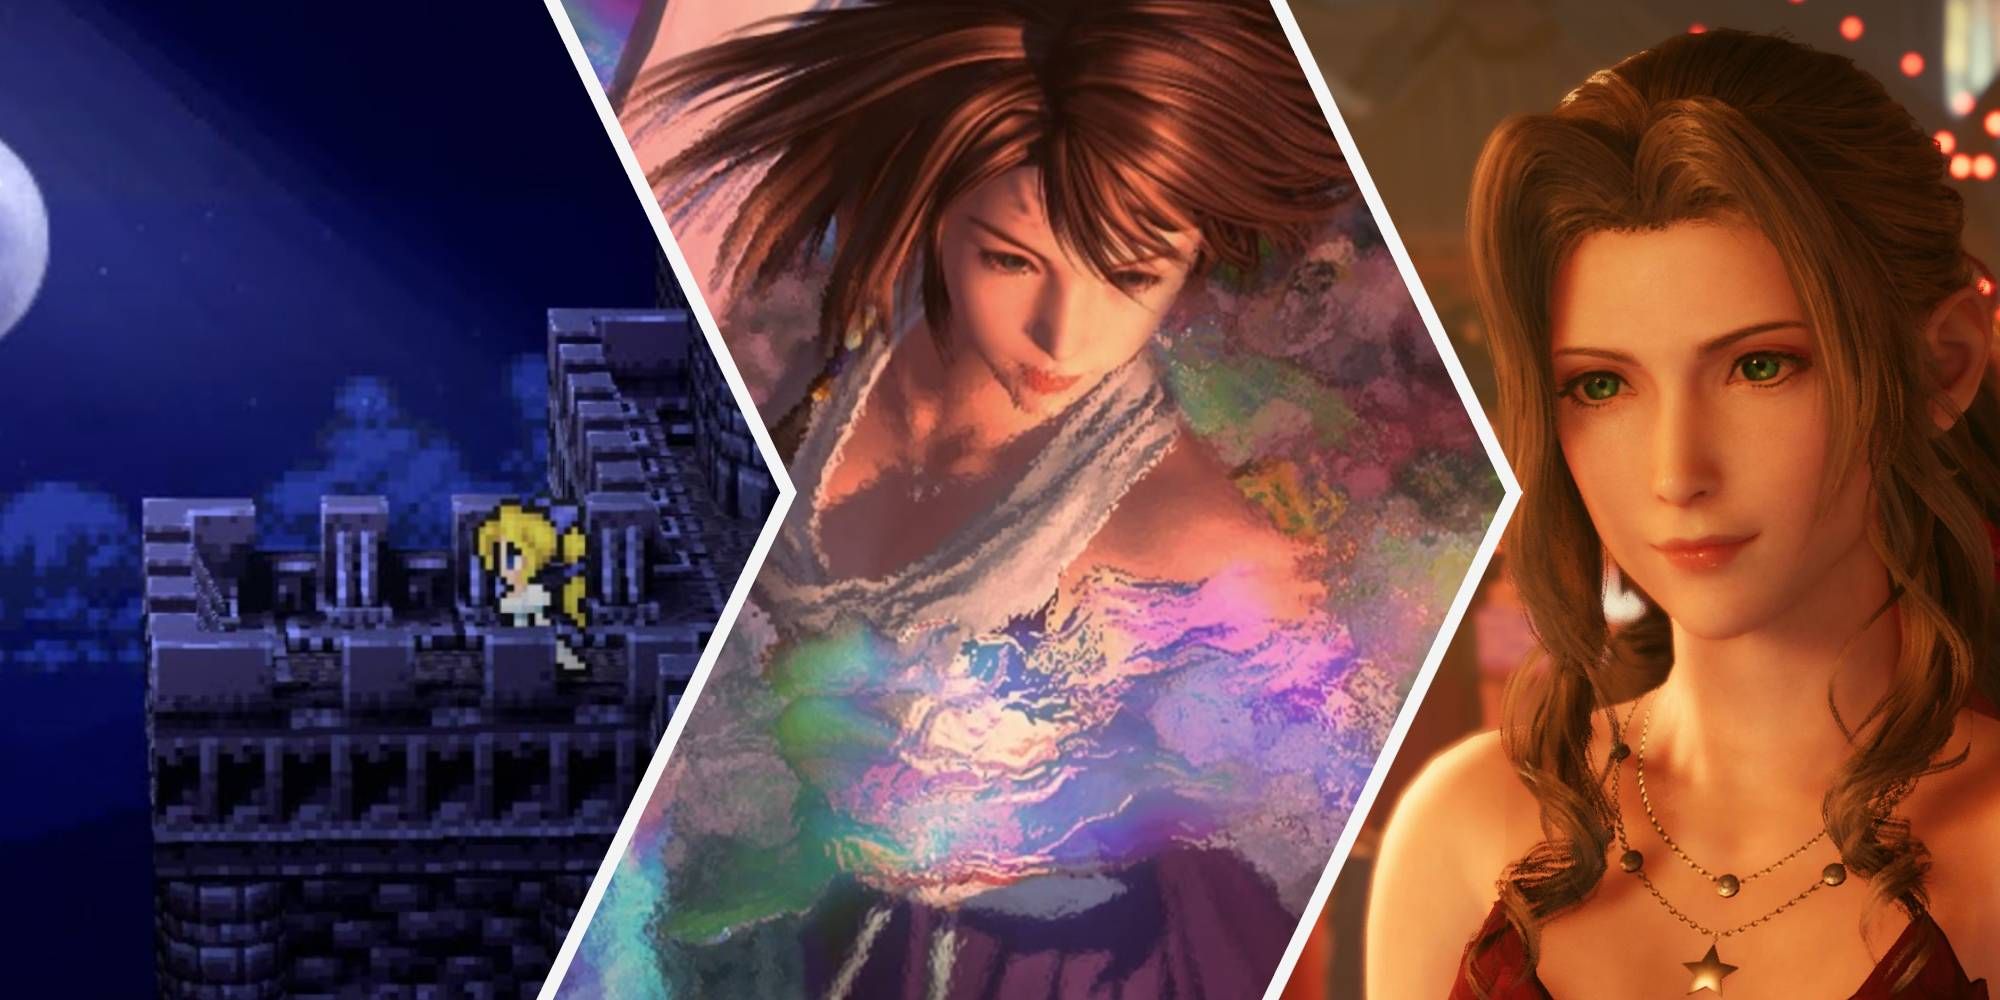 Celes from Final Fantasy 6 in the opera house, Yuna from Final Fantasy X performing a Sending, and Aerith from Final Fantasy 7 Remake at Wall Market